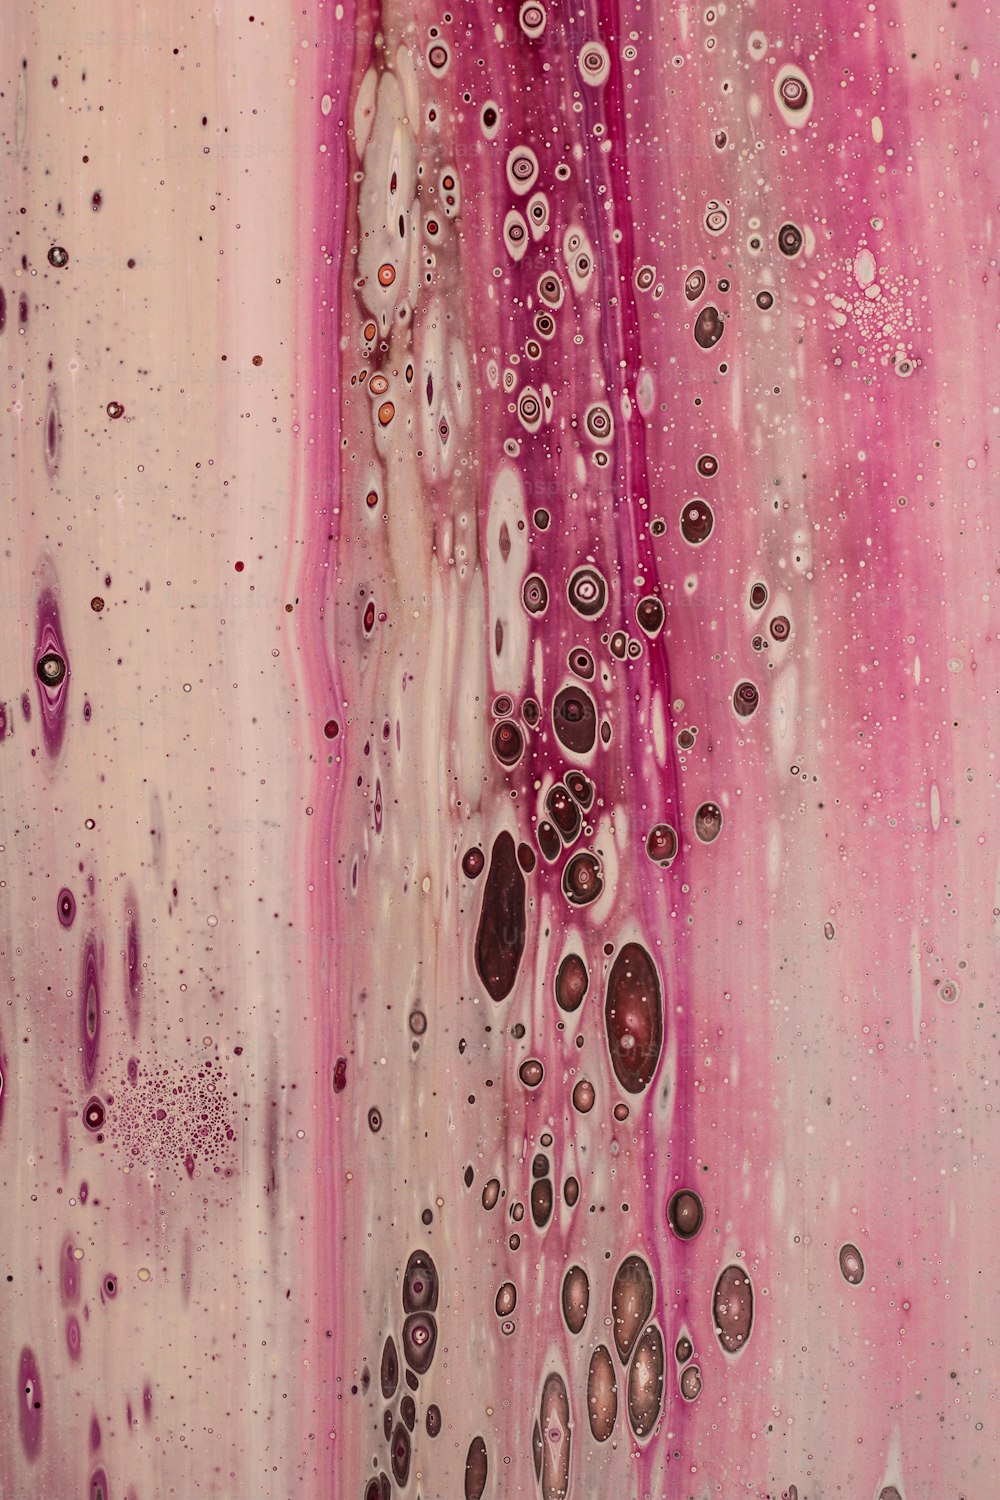 a close up of a painting with water drops